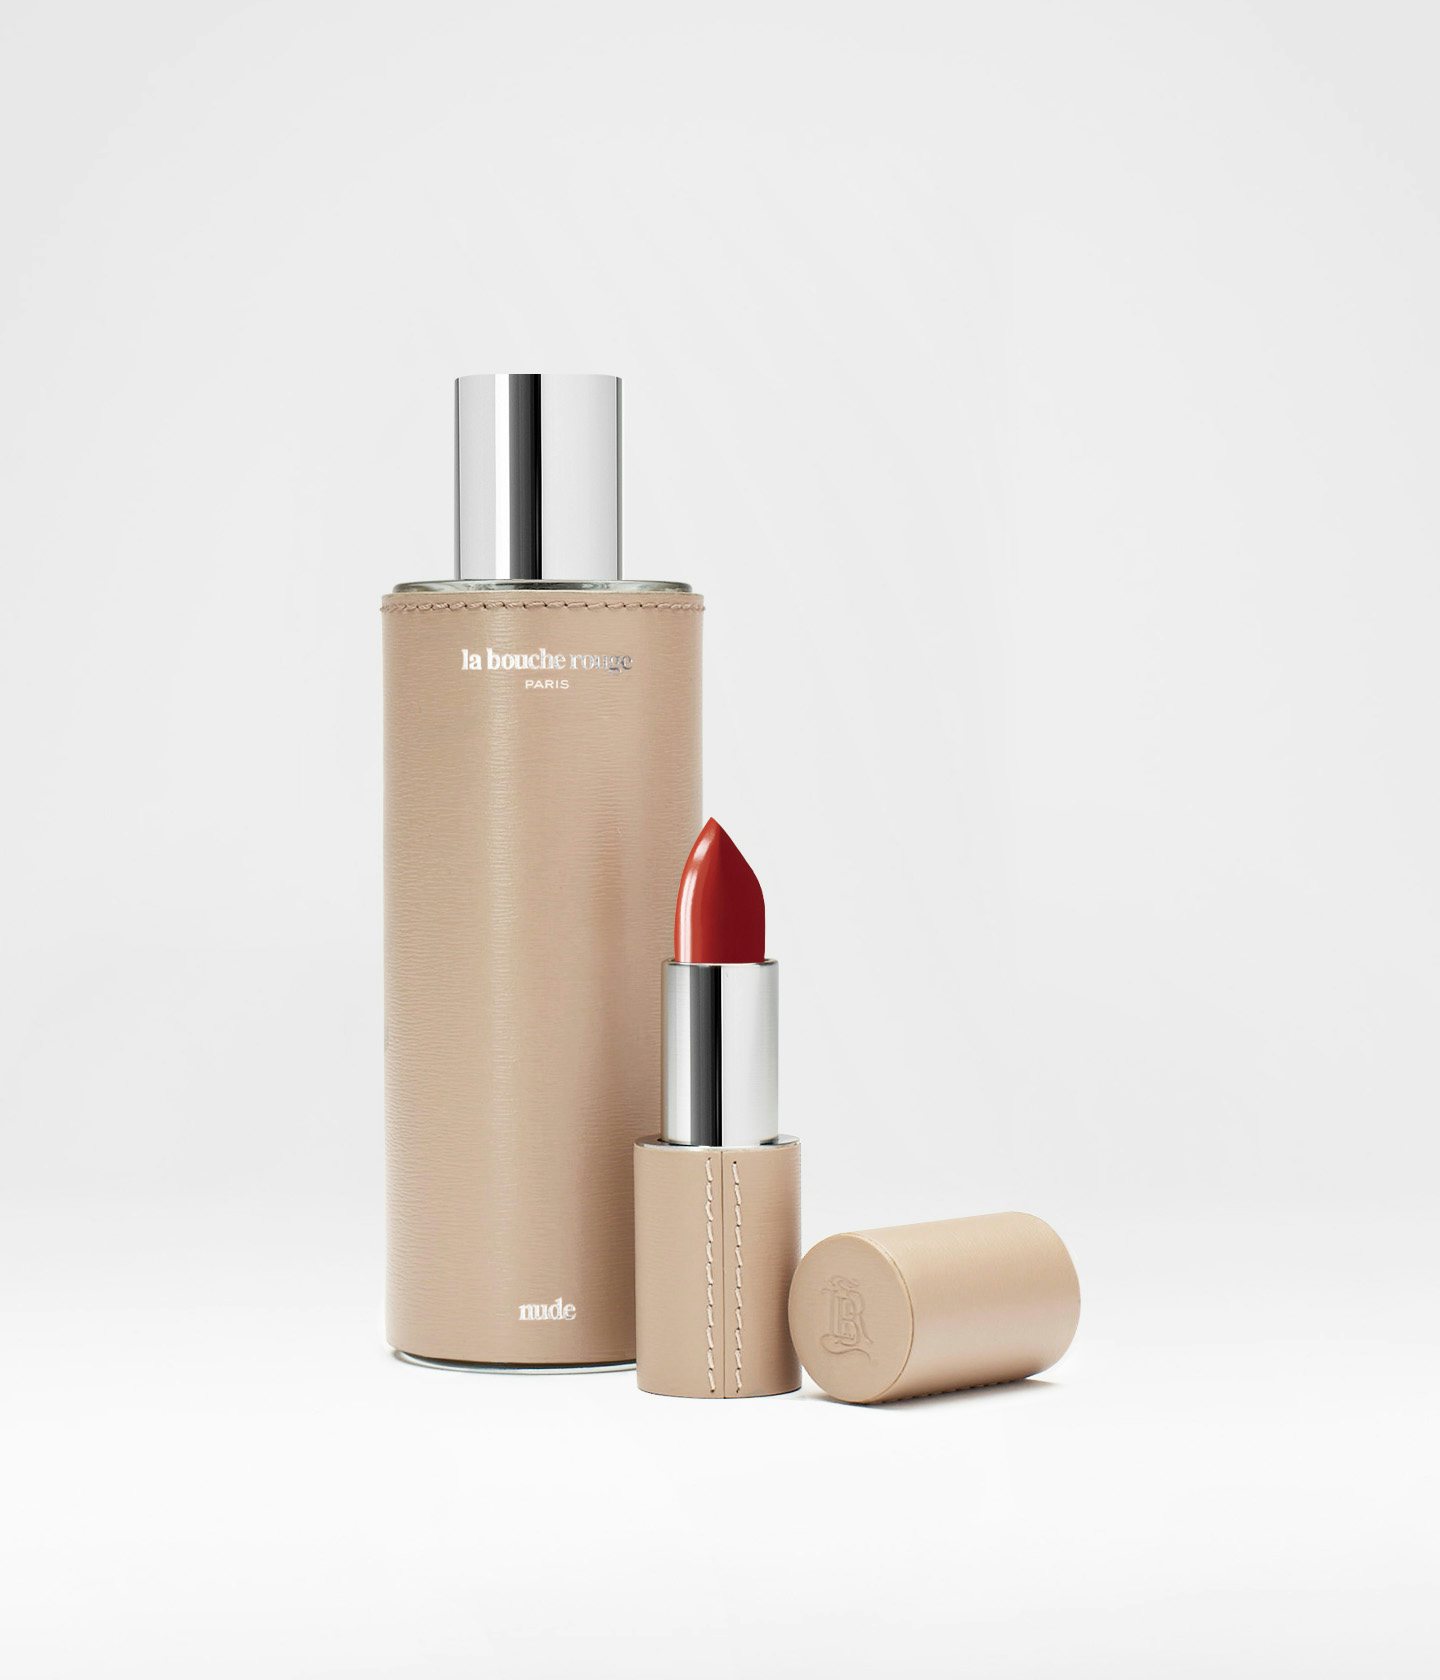 La bouche rouge the Nude Collection